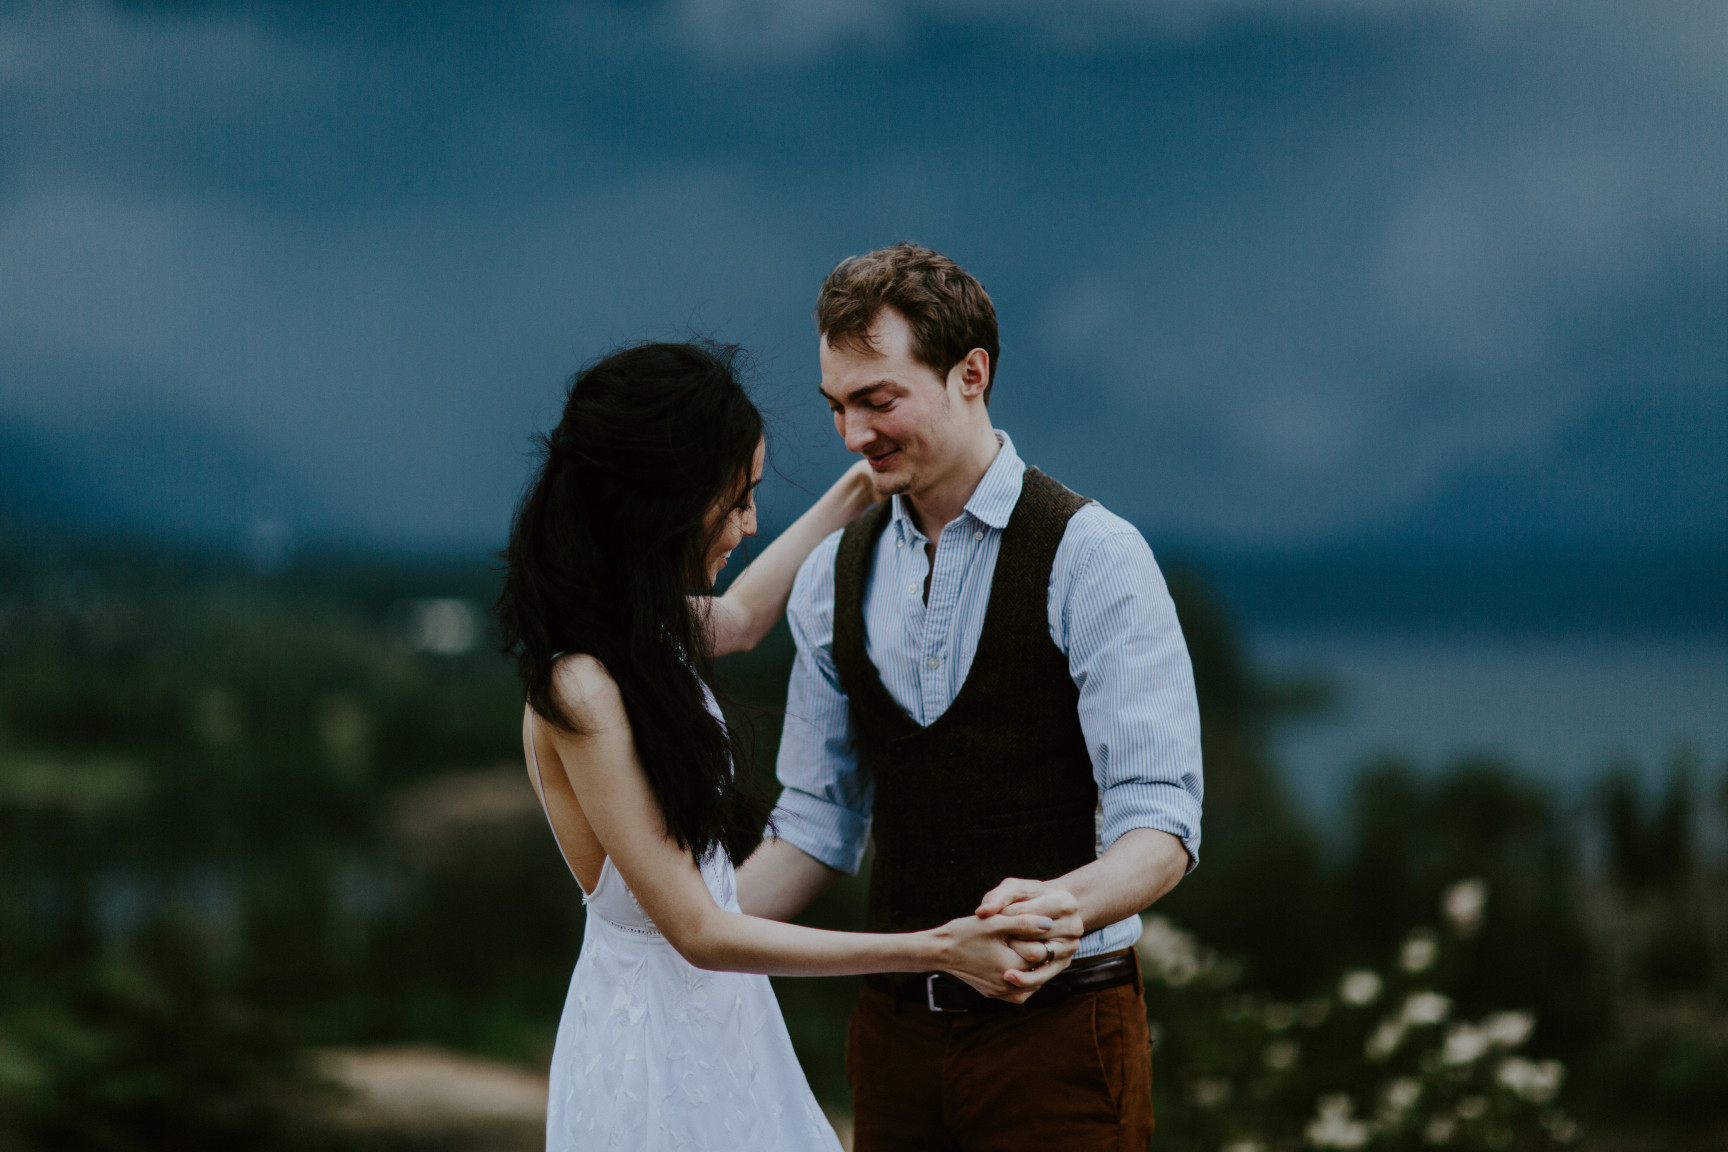 Kimberlie and Jacob dance at Cascade Locks, OR. Elopement wedding photography at Cascade Locks by Sienna Plus Josh.